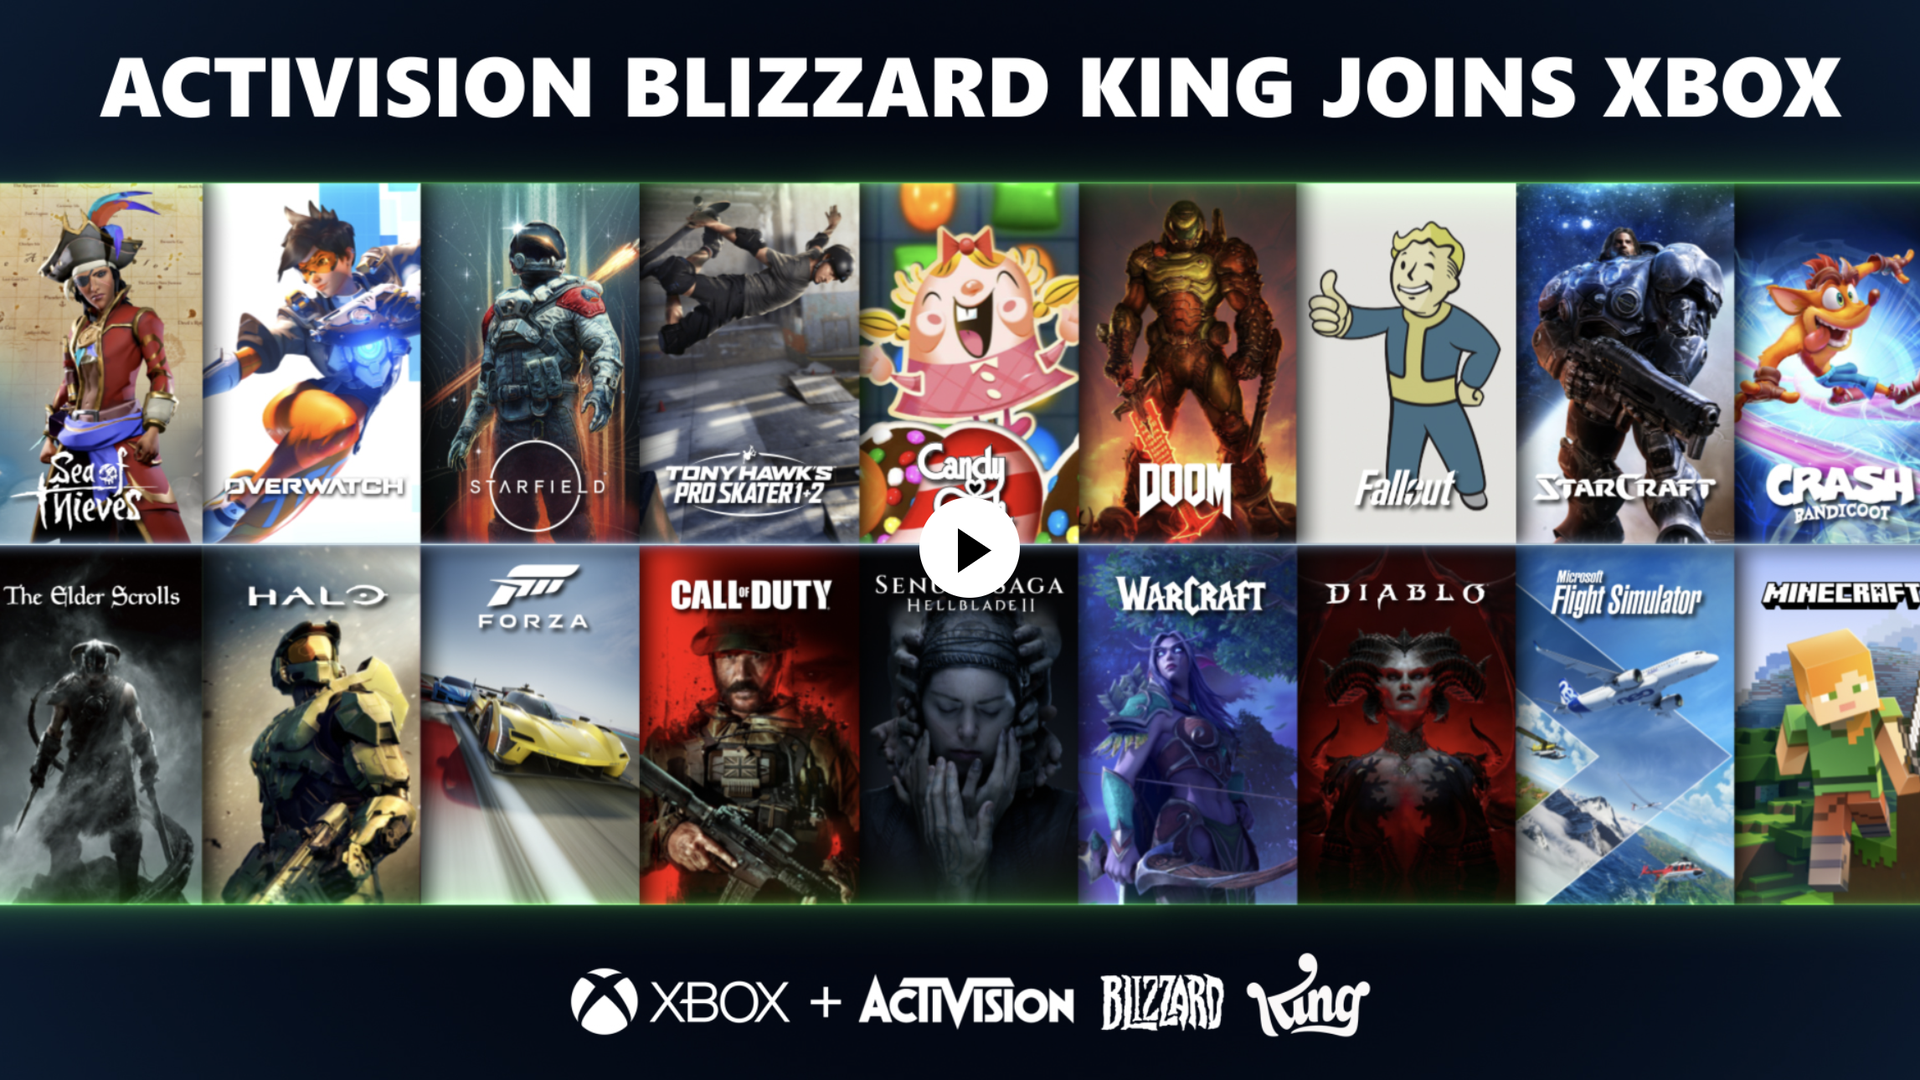 Will Microsoft's Activision Blizzard deal finally get done